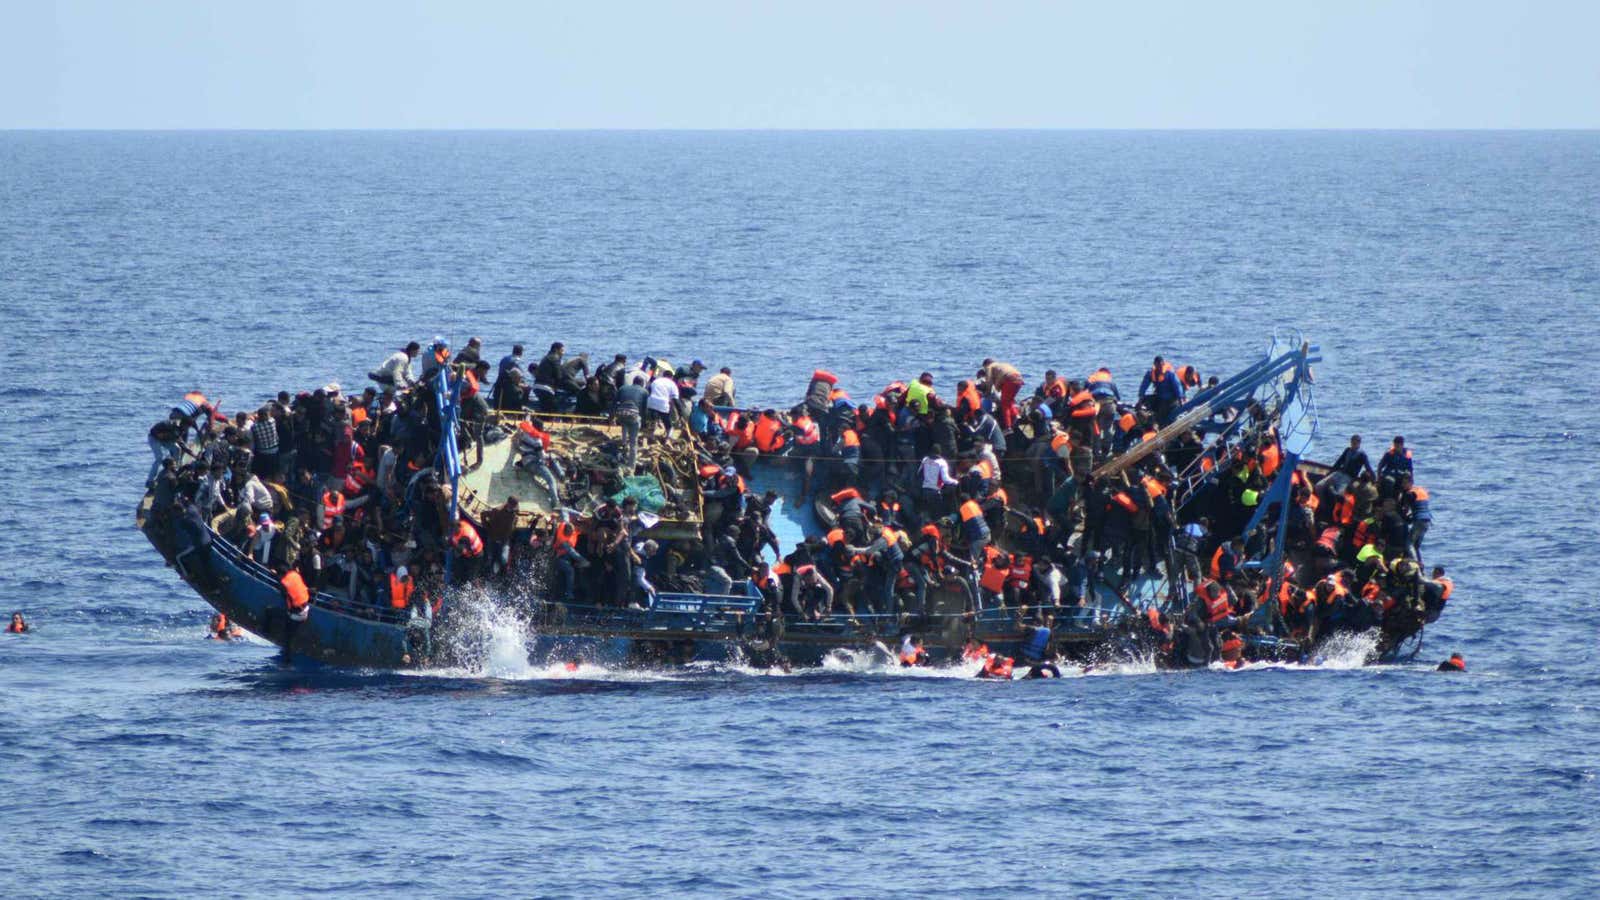 562 migrants were rescued.